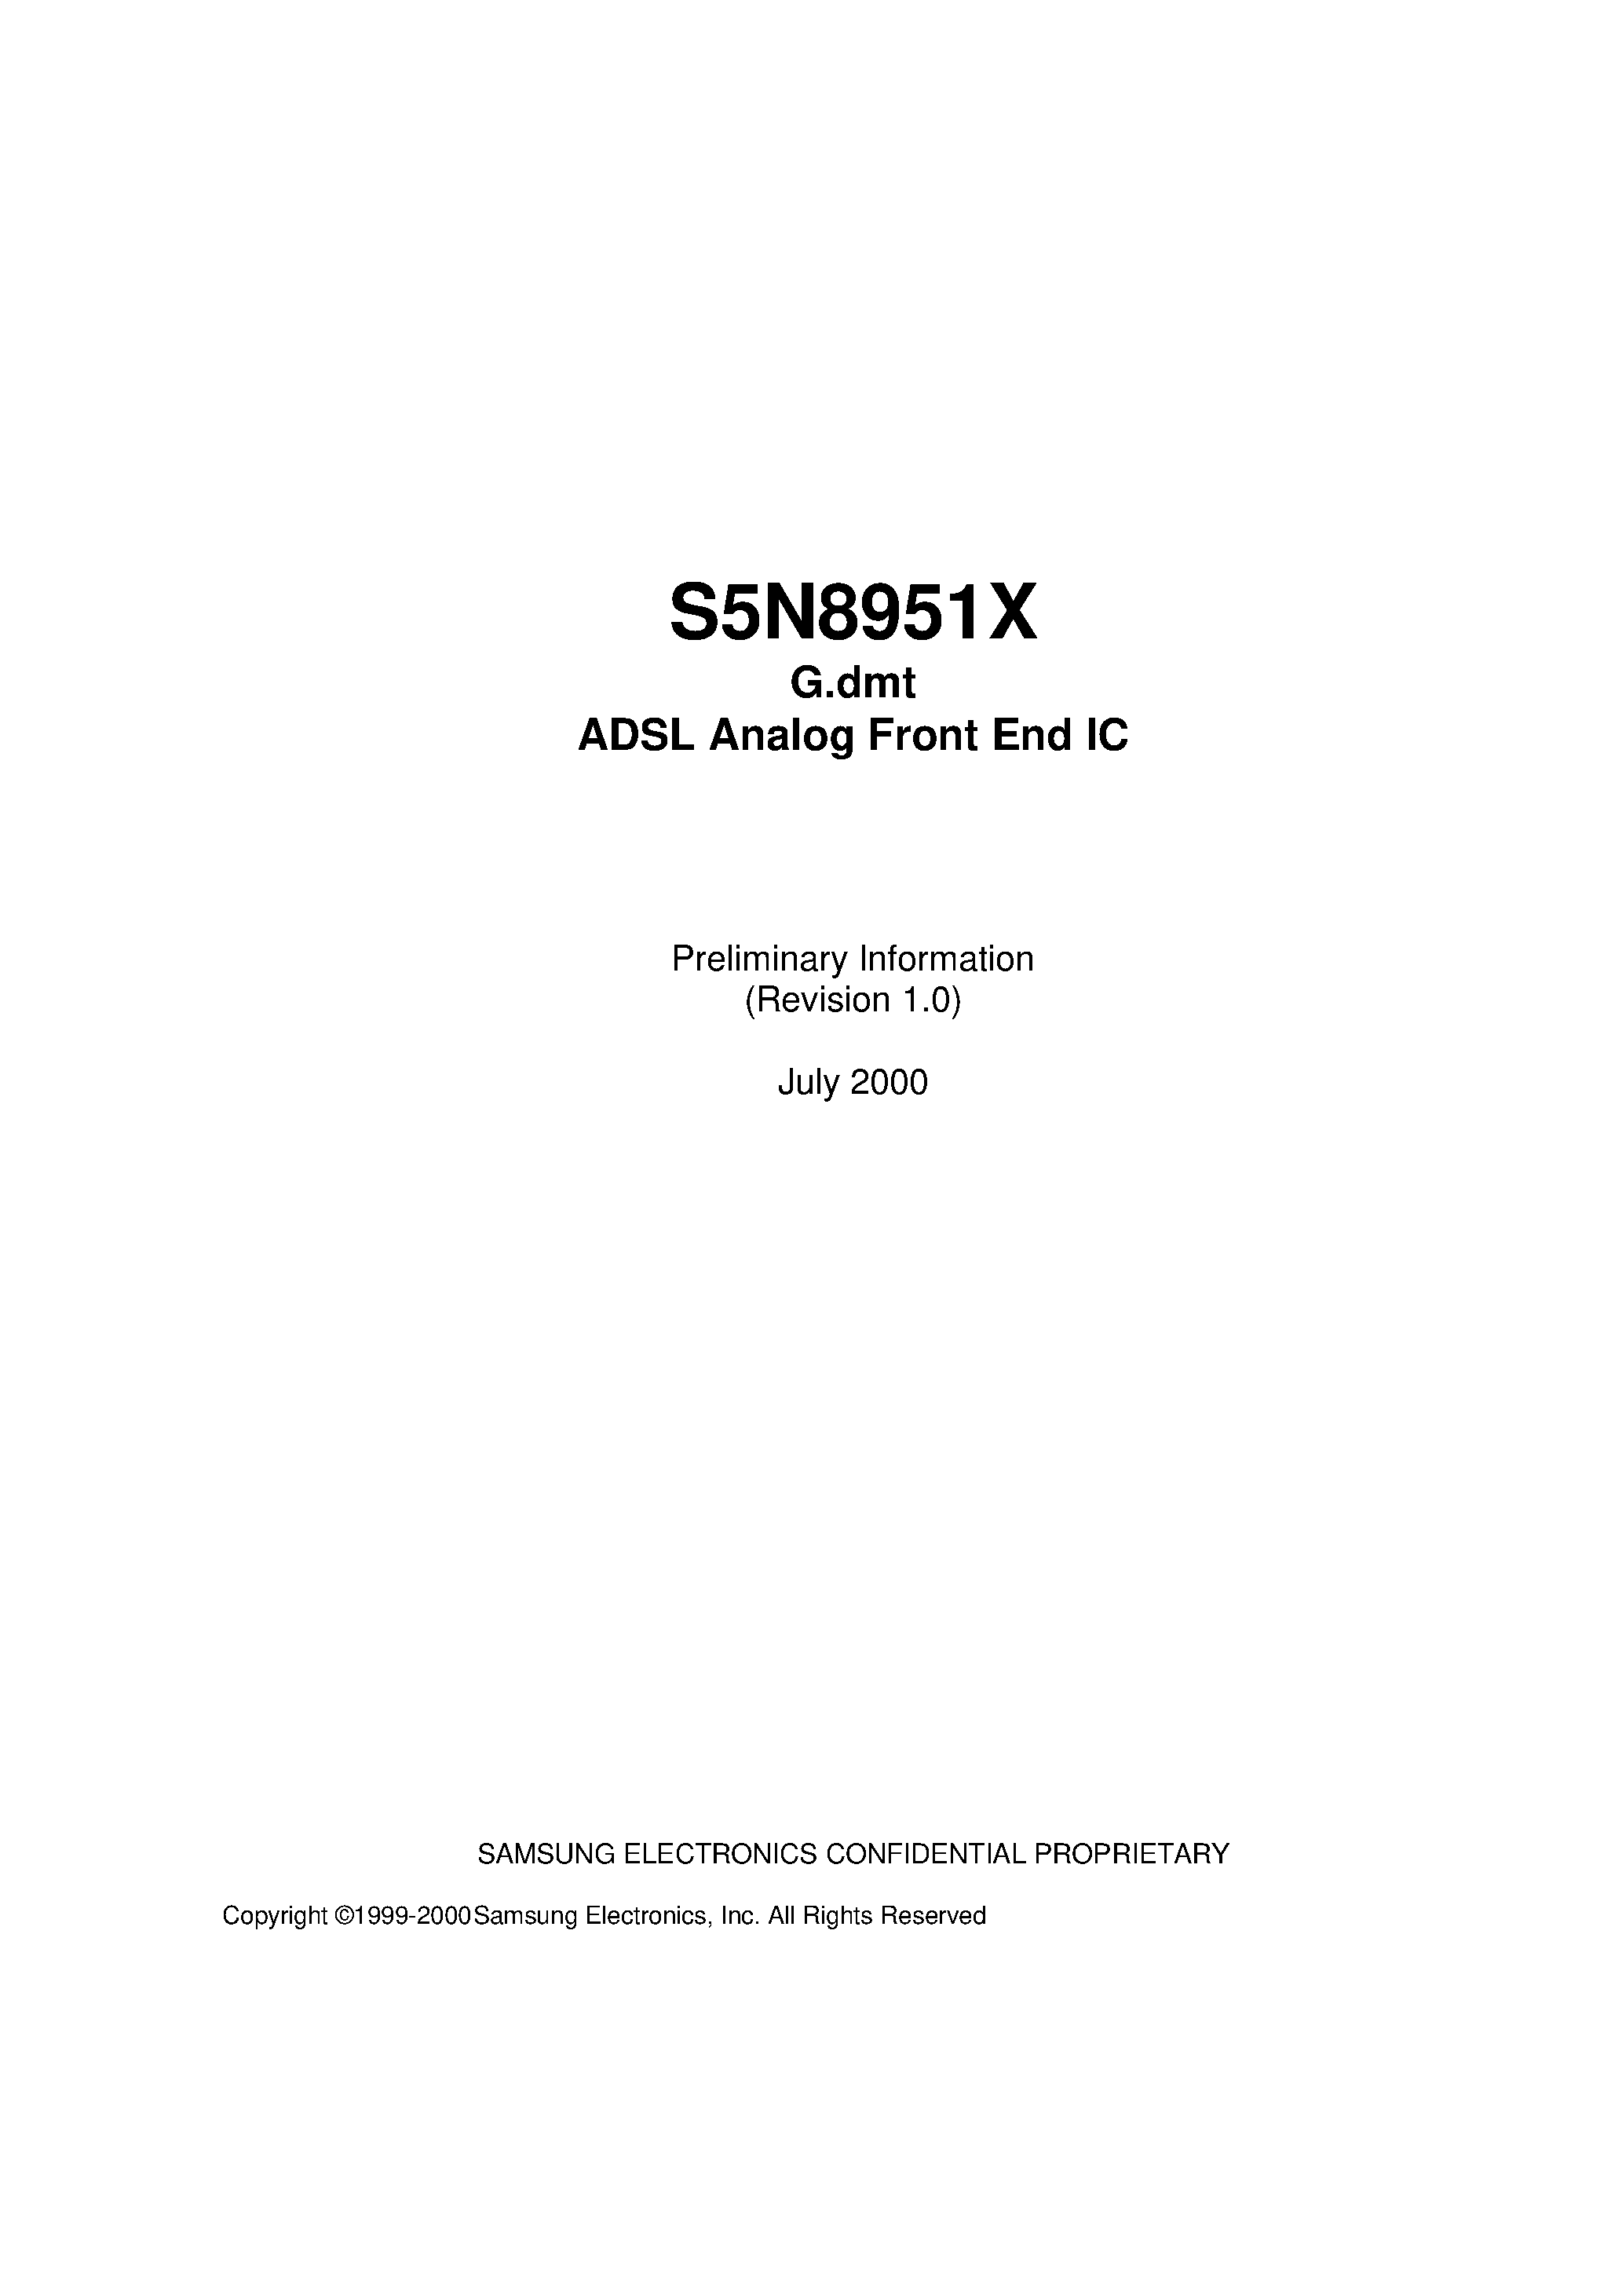 Datasheet S5N8951 - G.dmt ADSL Analog Front End IC page 1